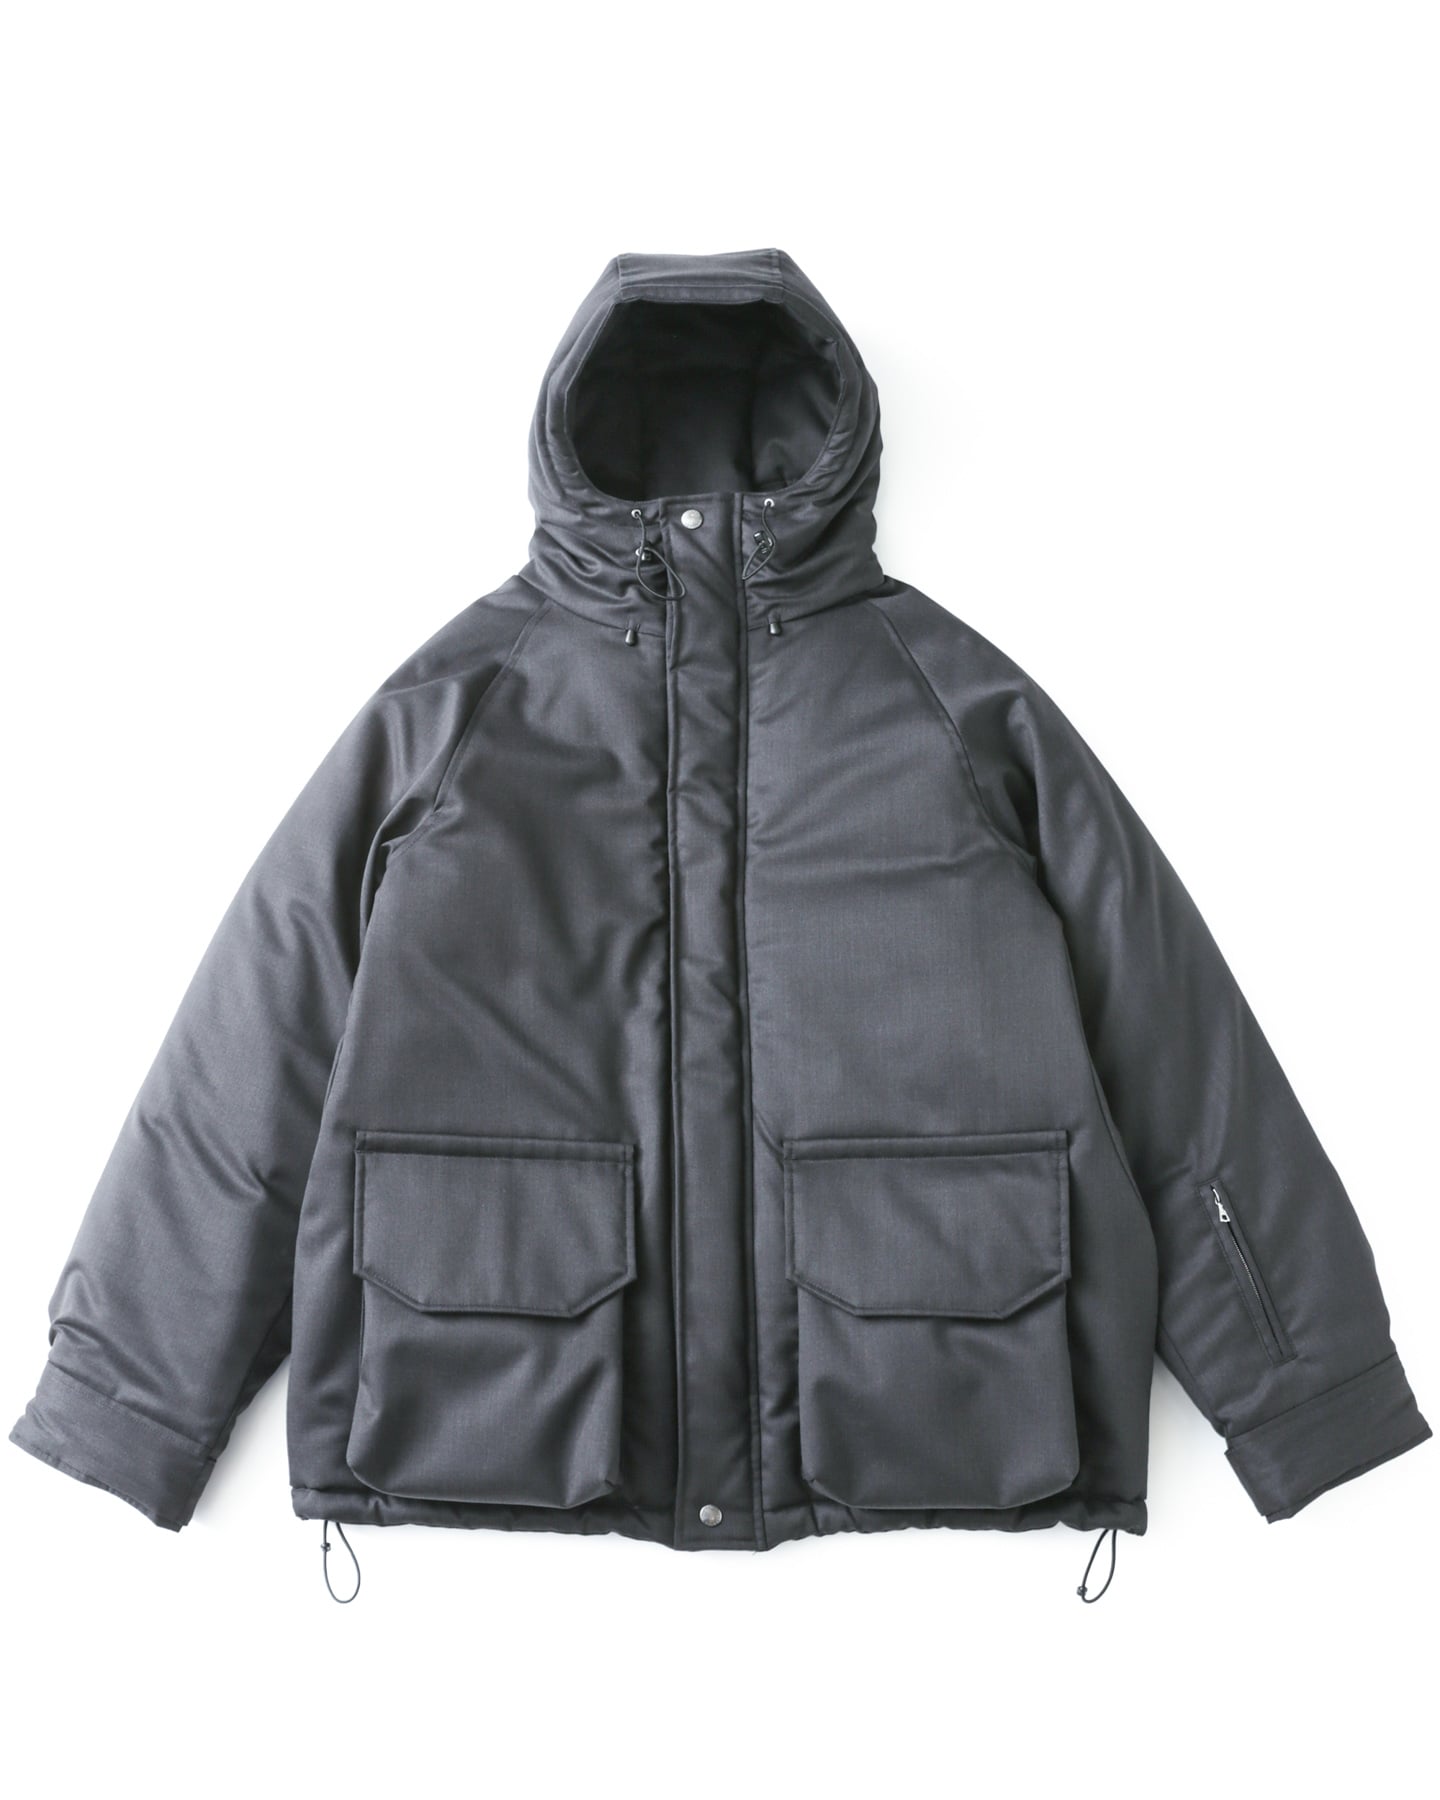 SOPH. | PADDED MOUNTAIN JACKET(M CHARCOAL GRAY):